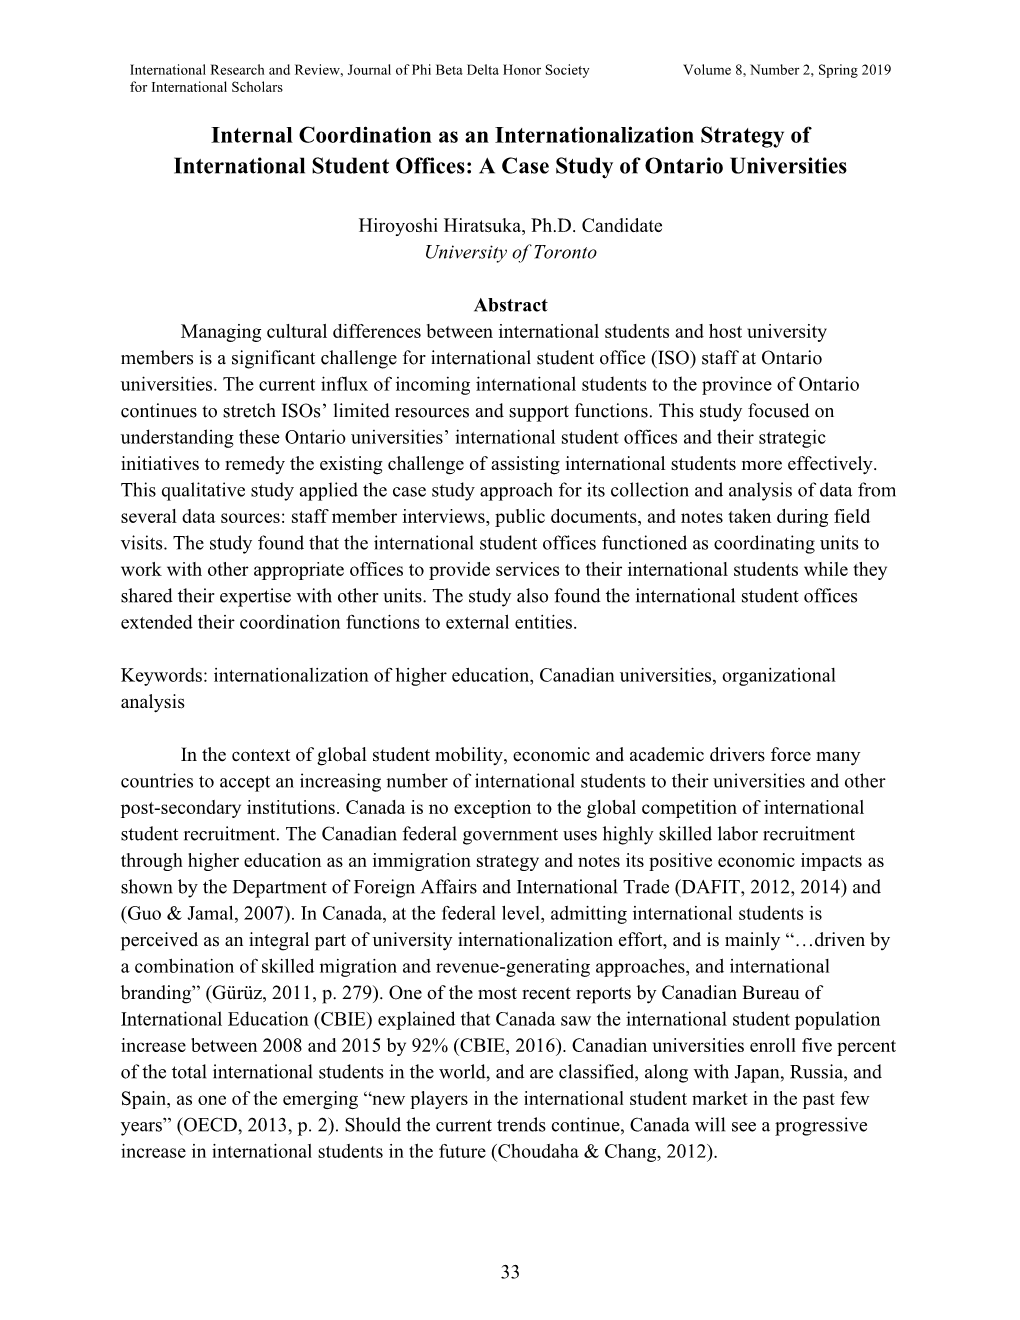 Internal Coordination As an Internationalization Strategy of International Student Offices: a Case Study of Ontario Universities